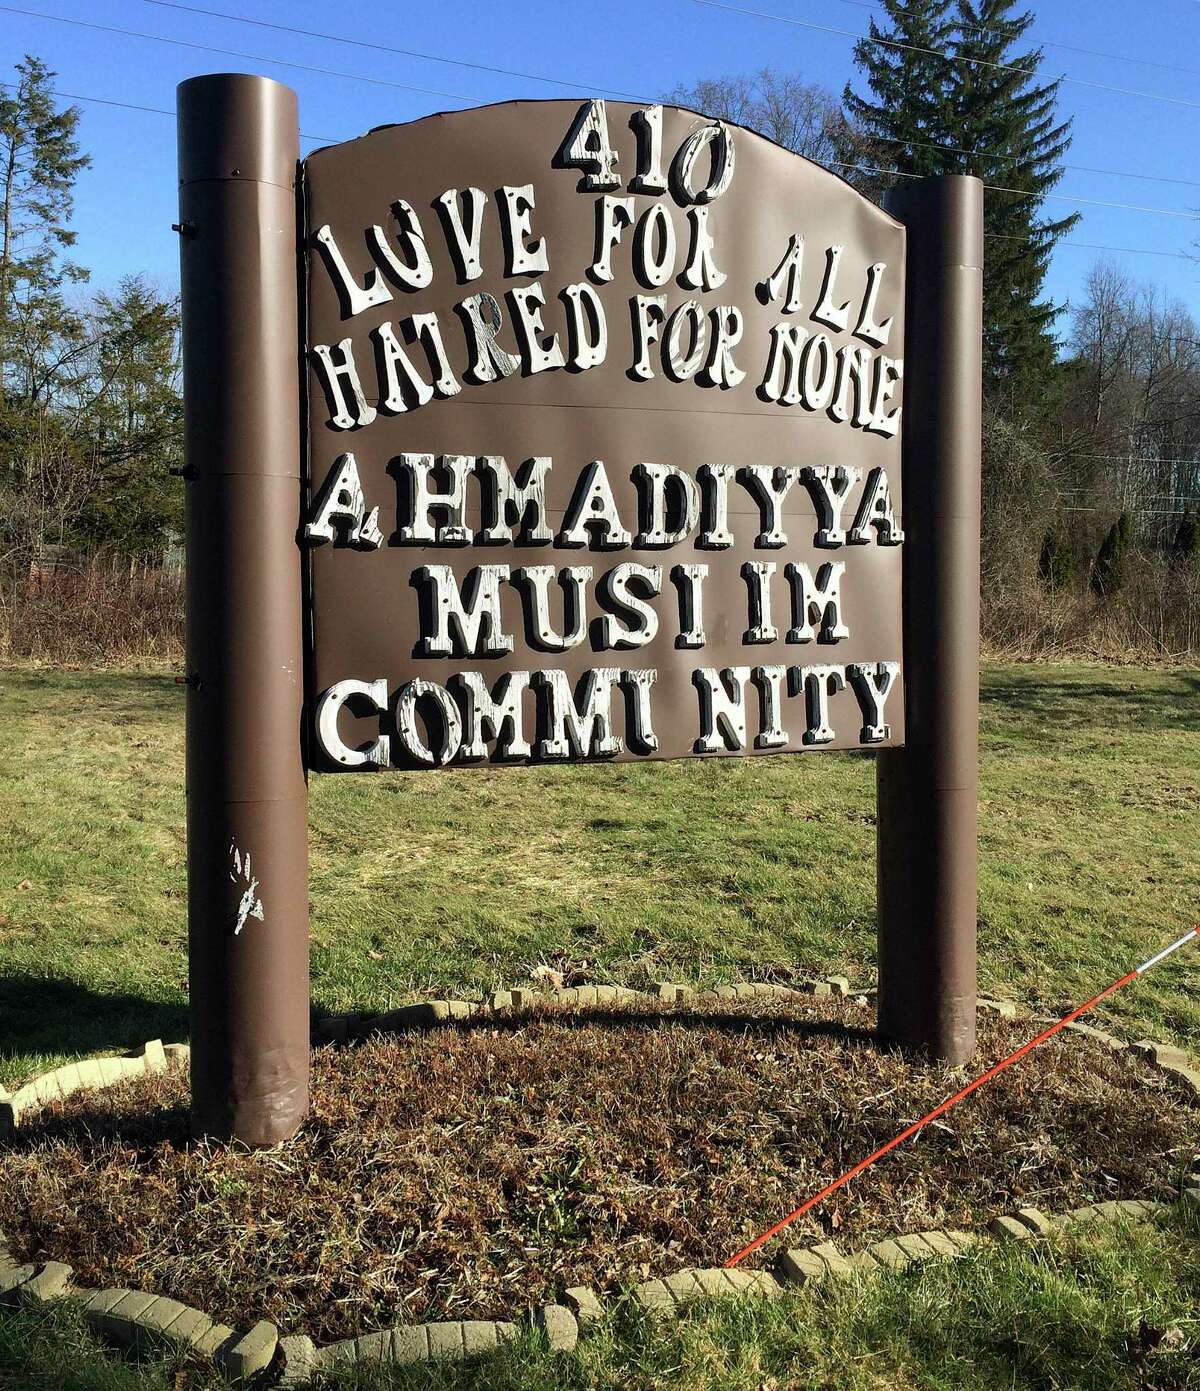 A sign inscribed “Love for all, hatred for none” stands outside the Baitul Aman mosque where the Ahmadiyya Muslim Community worships in Meriden.